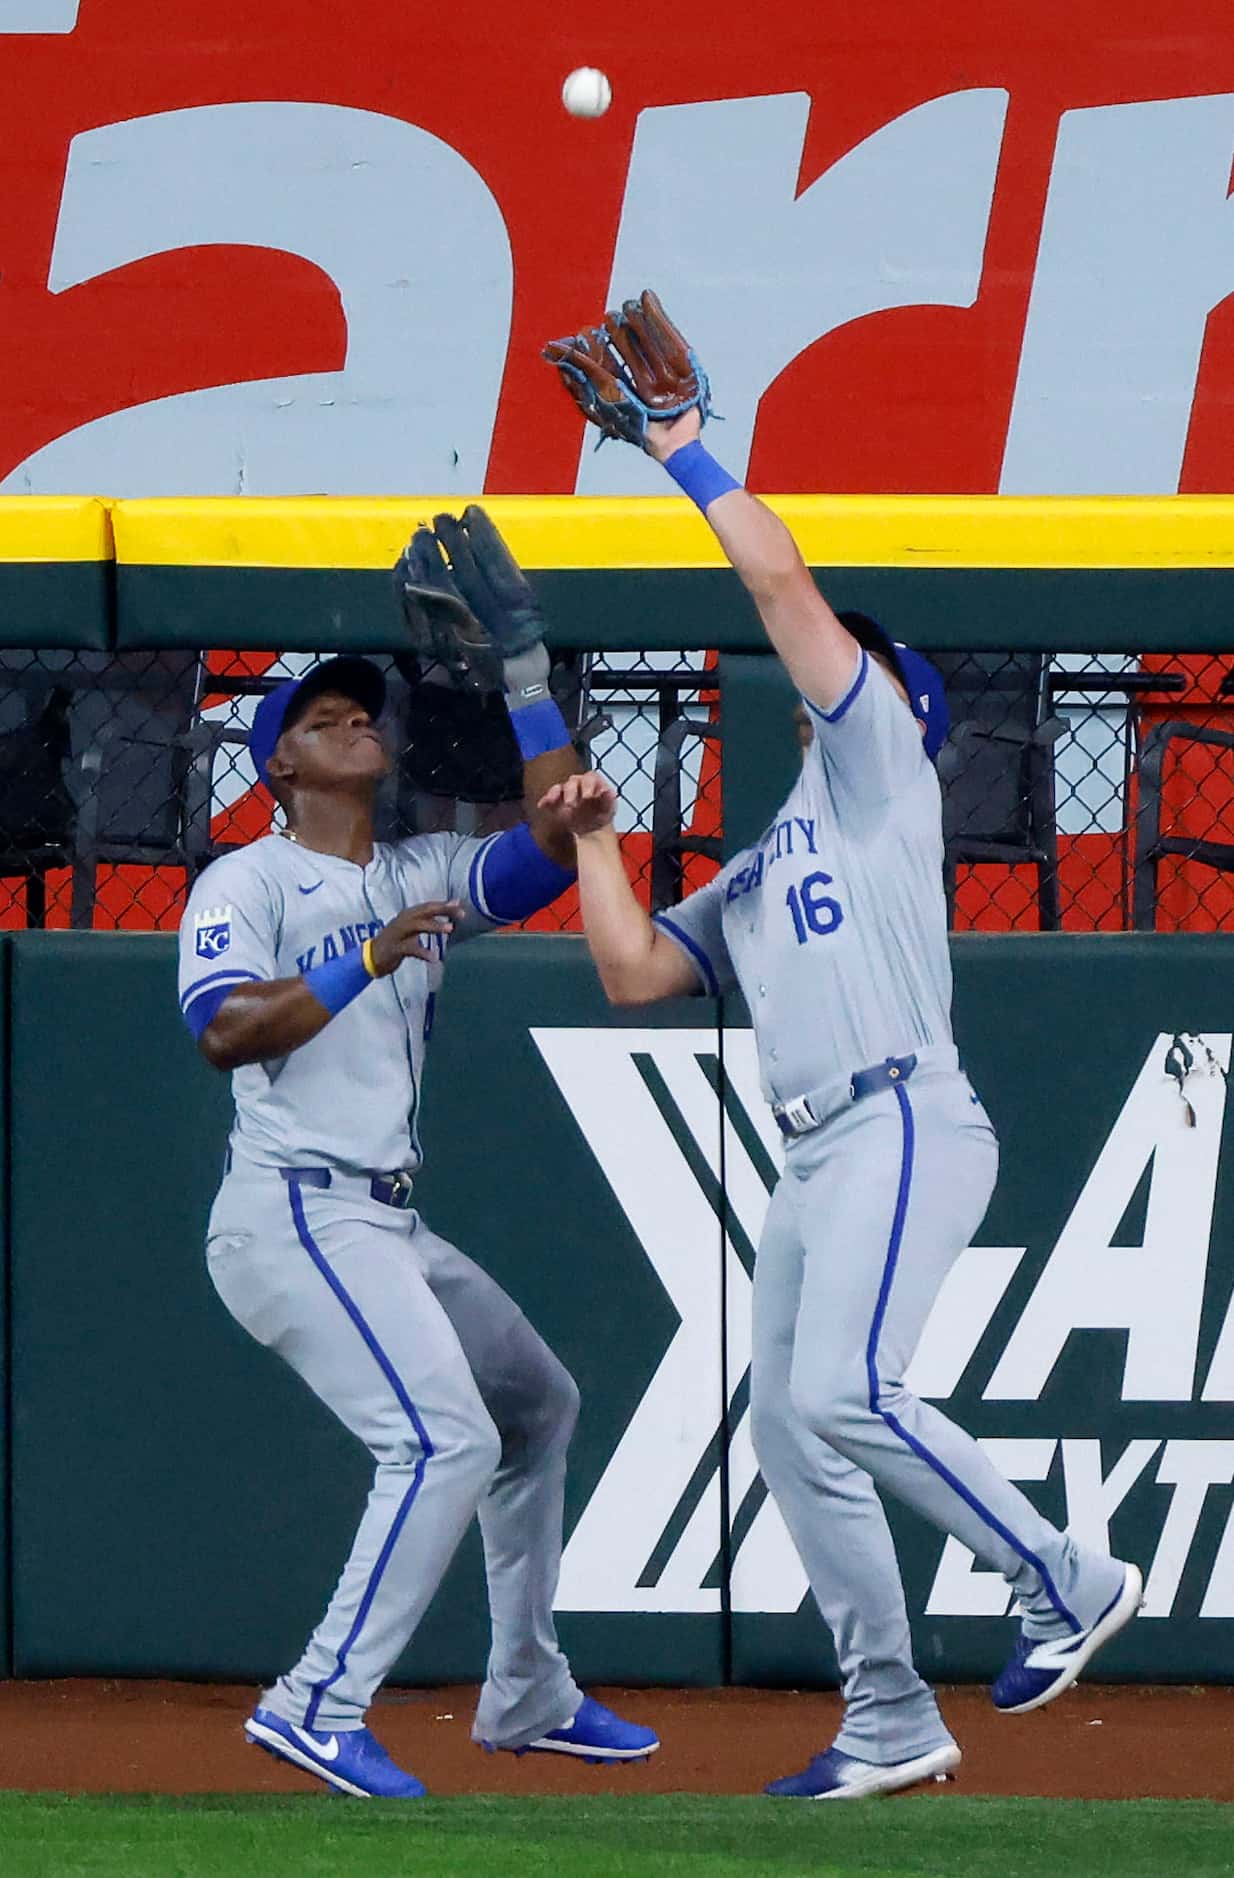 Kansas City Royals outfielders Hunter Renfroe (16) and Dairon Blanco (44) nearly collide as...